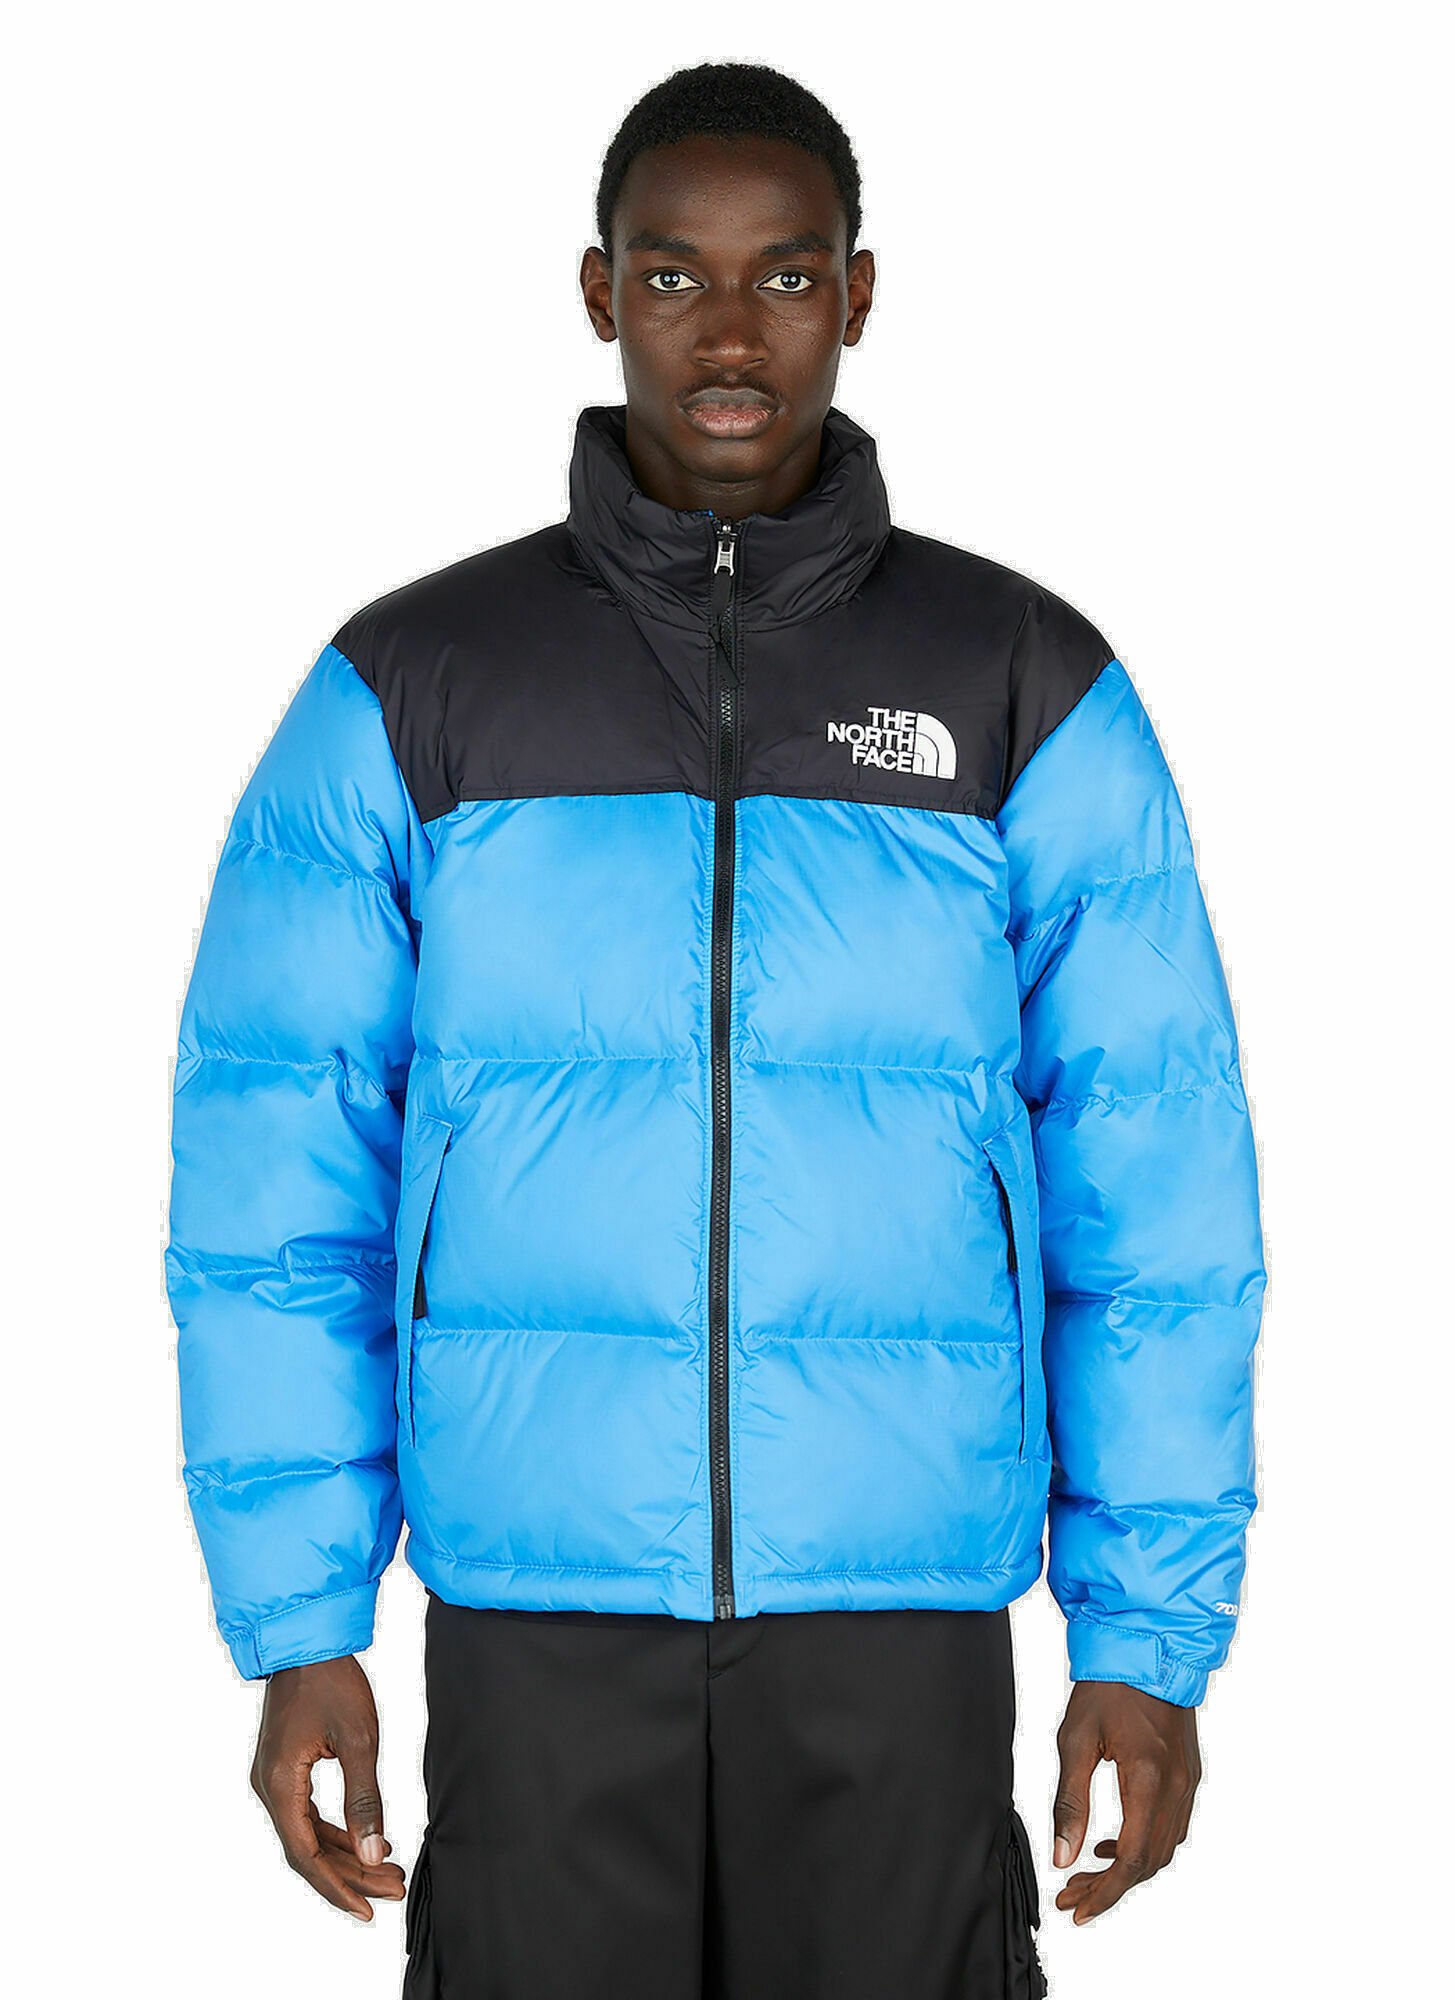 The North Face - 1996 Retro Nuptse Jacket in Blue The North Face